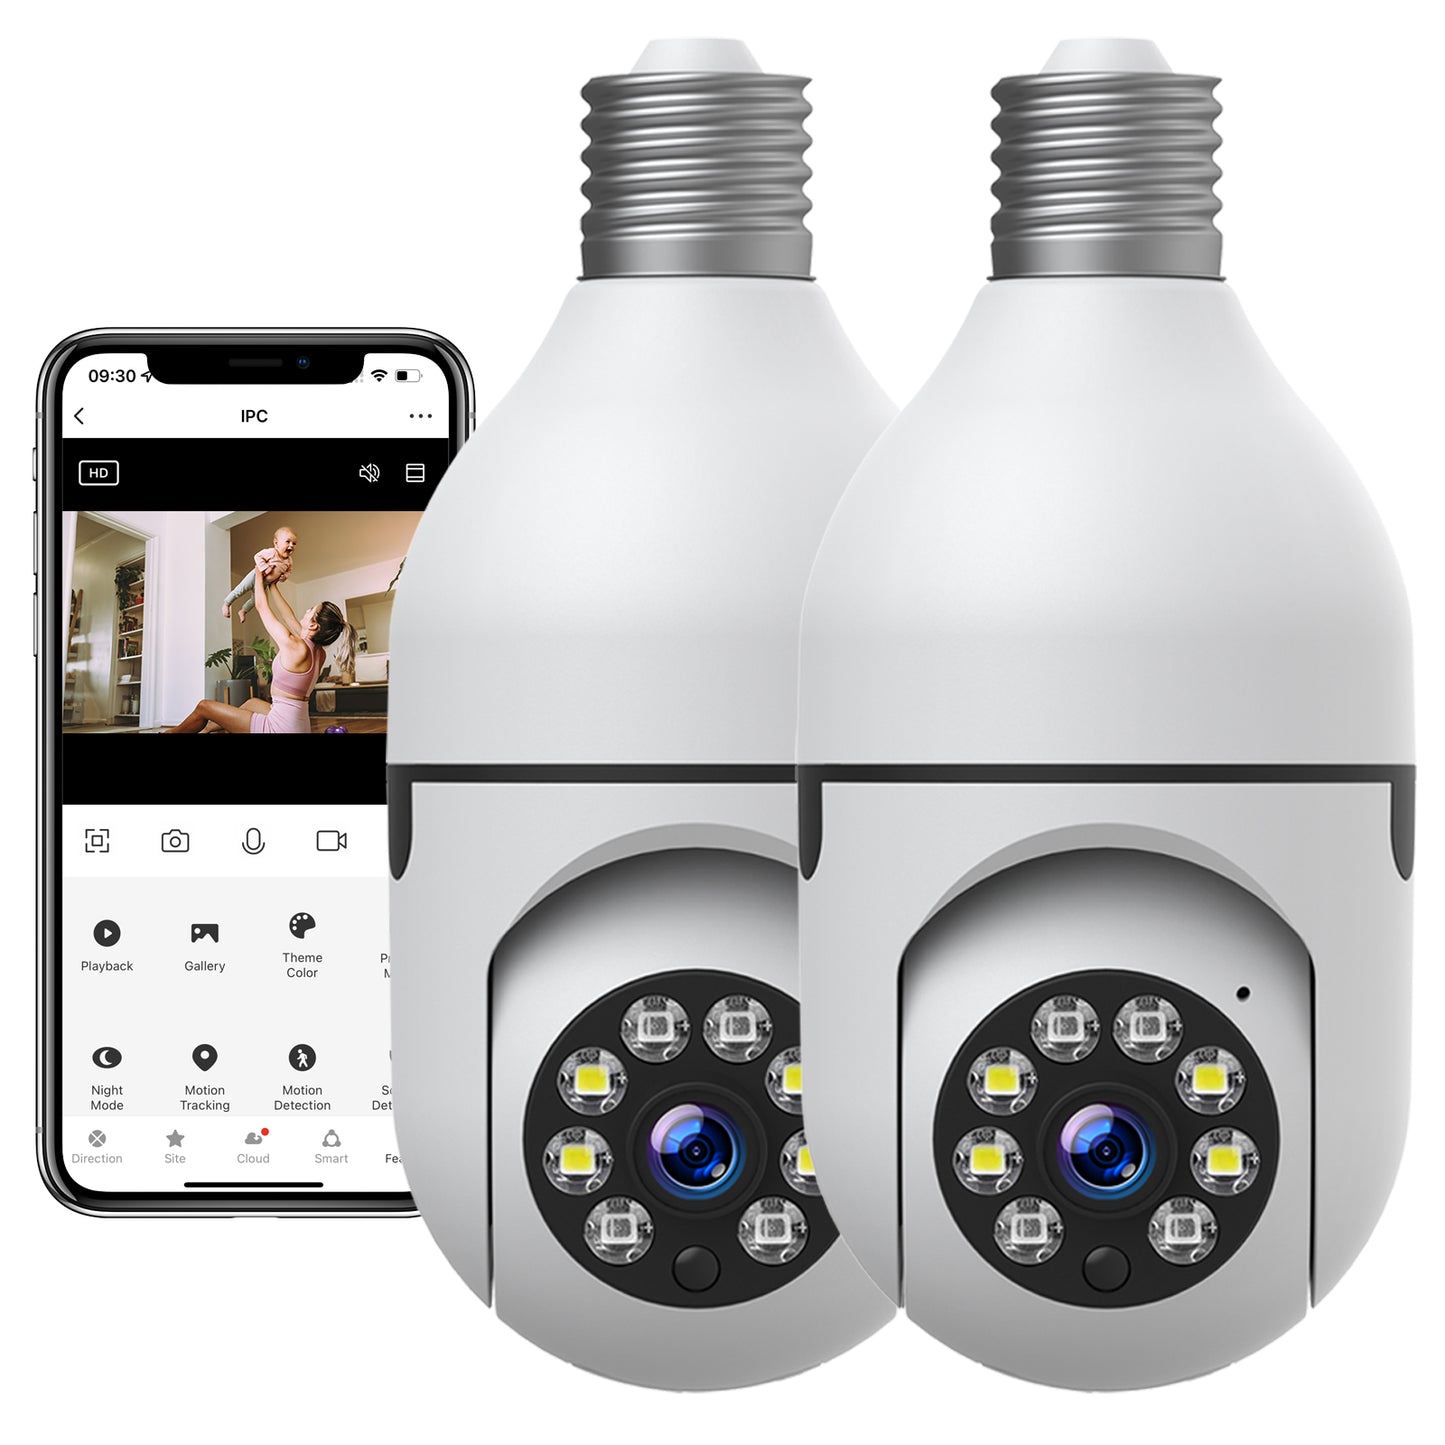 TOGUARD E27 1080P Light Bulb Camera 2.4G WiFi Dome Security Camera Wireless Outdoor, 2-Way Audio Color Night Vision 360° IP Camera with Motion Detection Remote Access (2PCS)